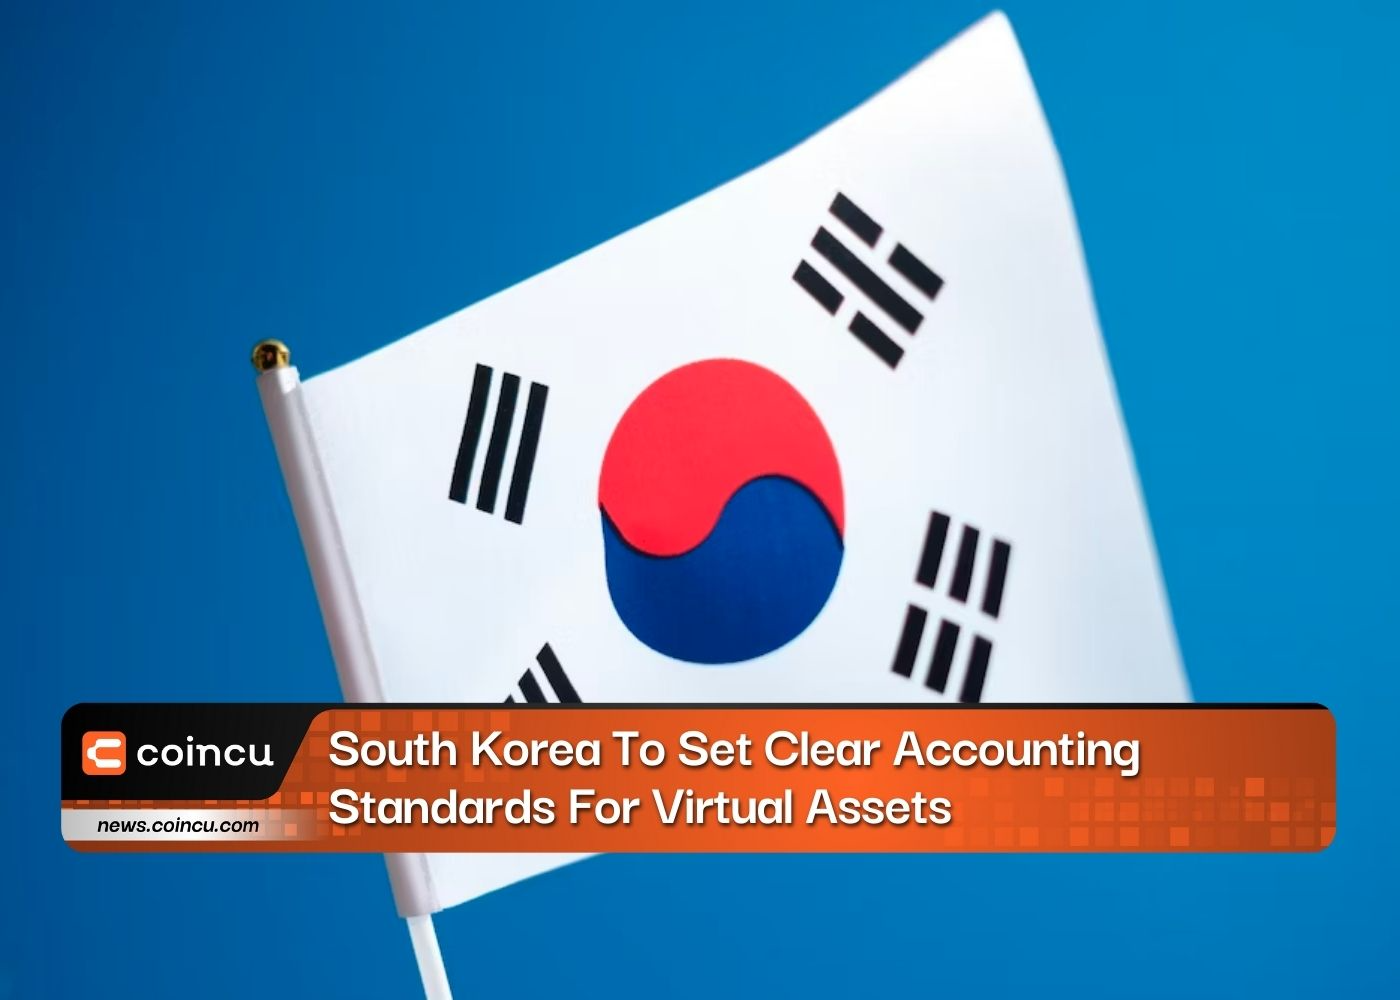 South Korea To Set Clear Accounting Standards For Virtual Assets